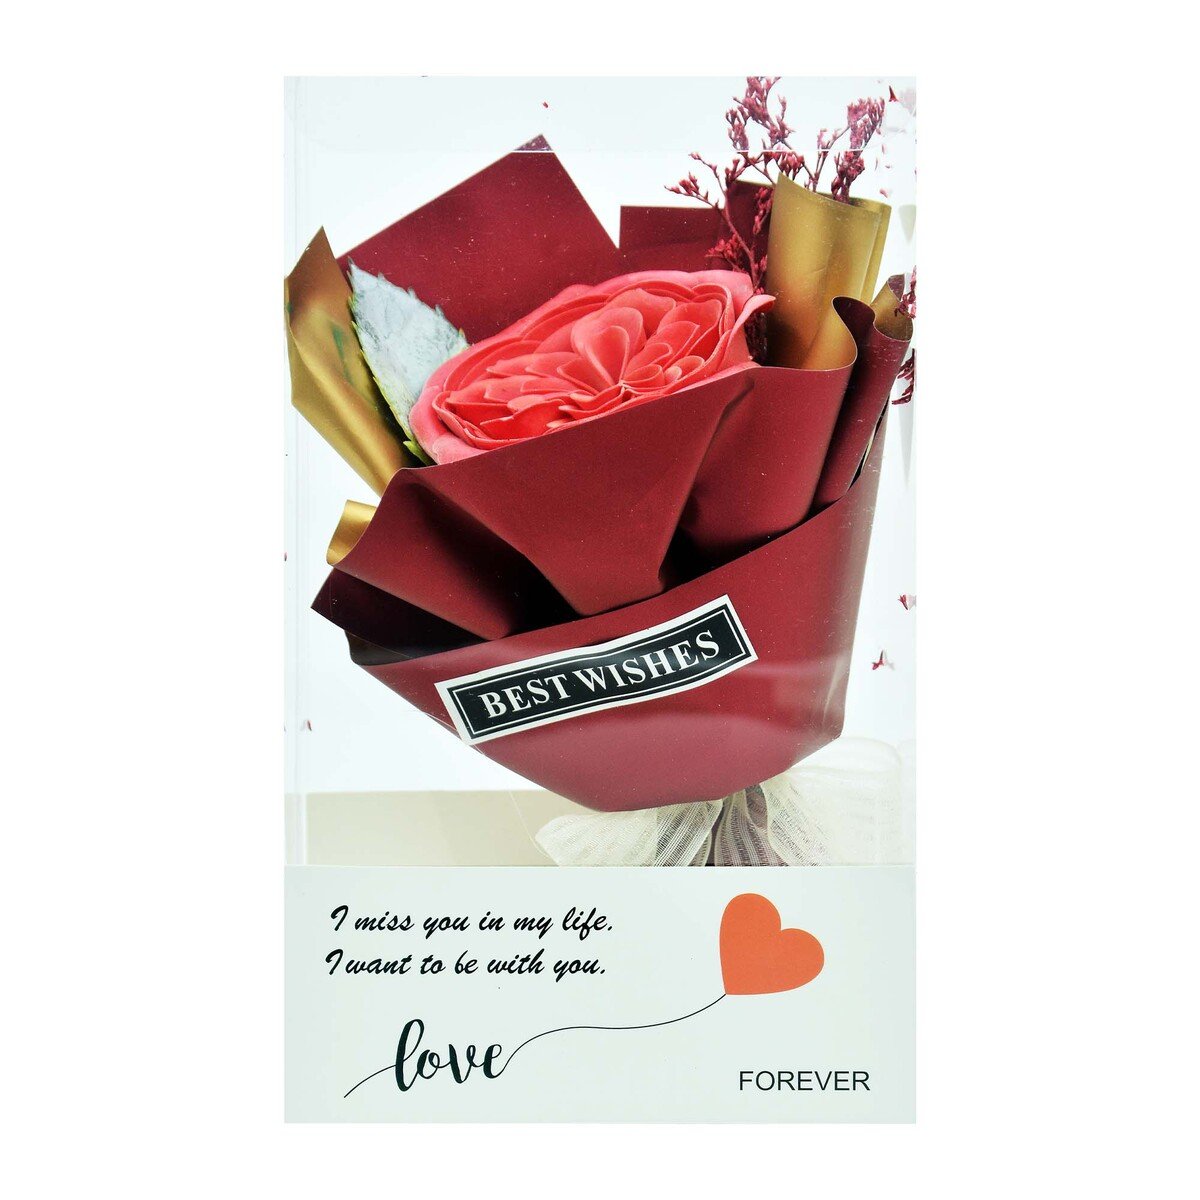 St. Valentine's Day online shopping gifts in boxes. Search in